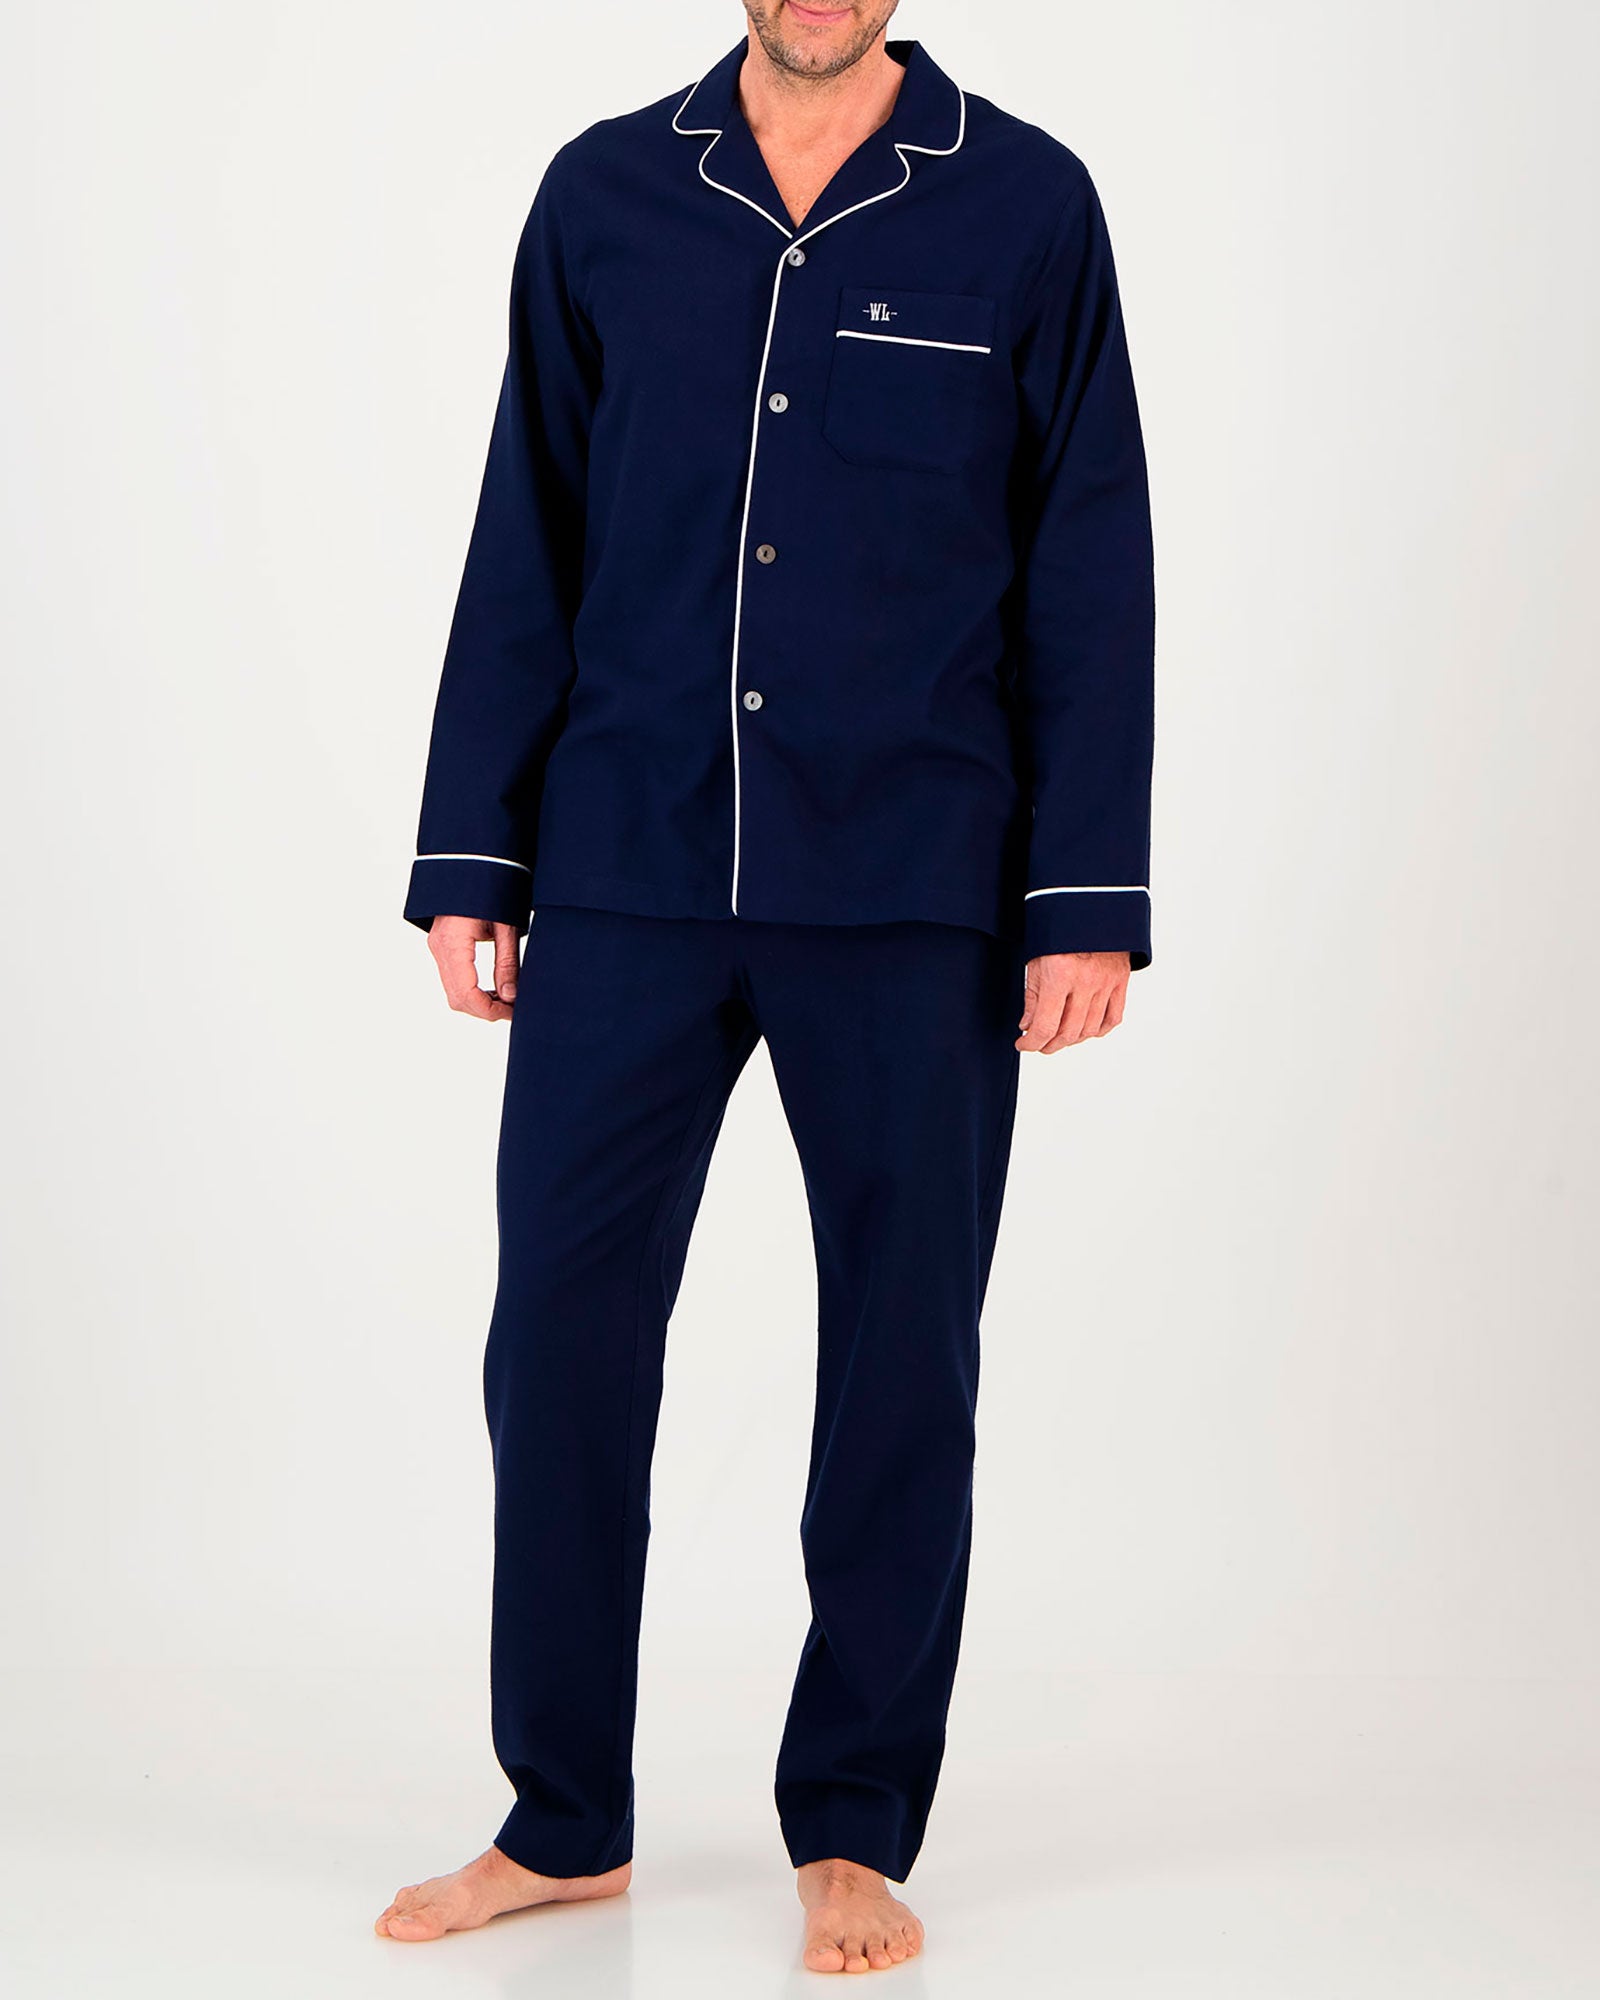 Mens Brushed Cotton Flannel Long Pyjamas in Navy with White Piping Front - Woodstock Laundry UK